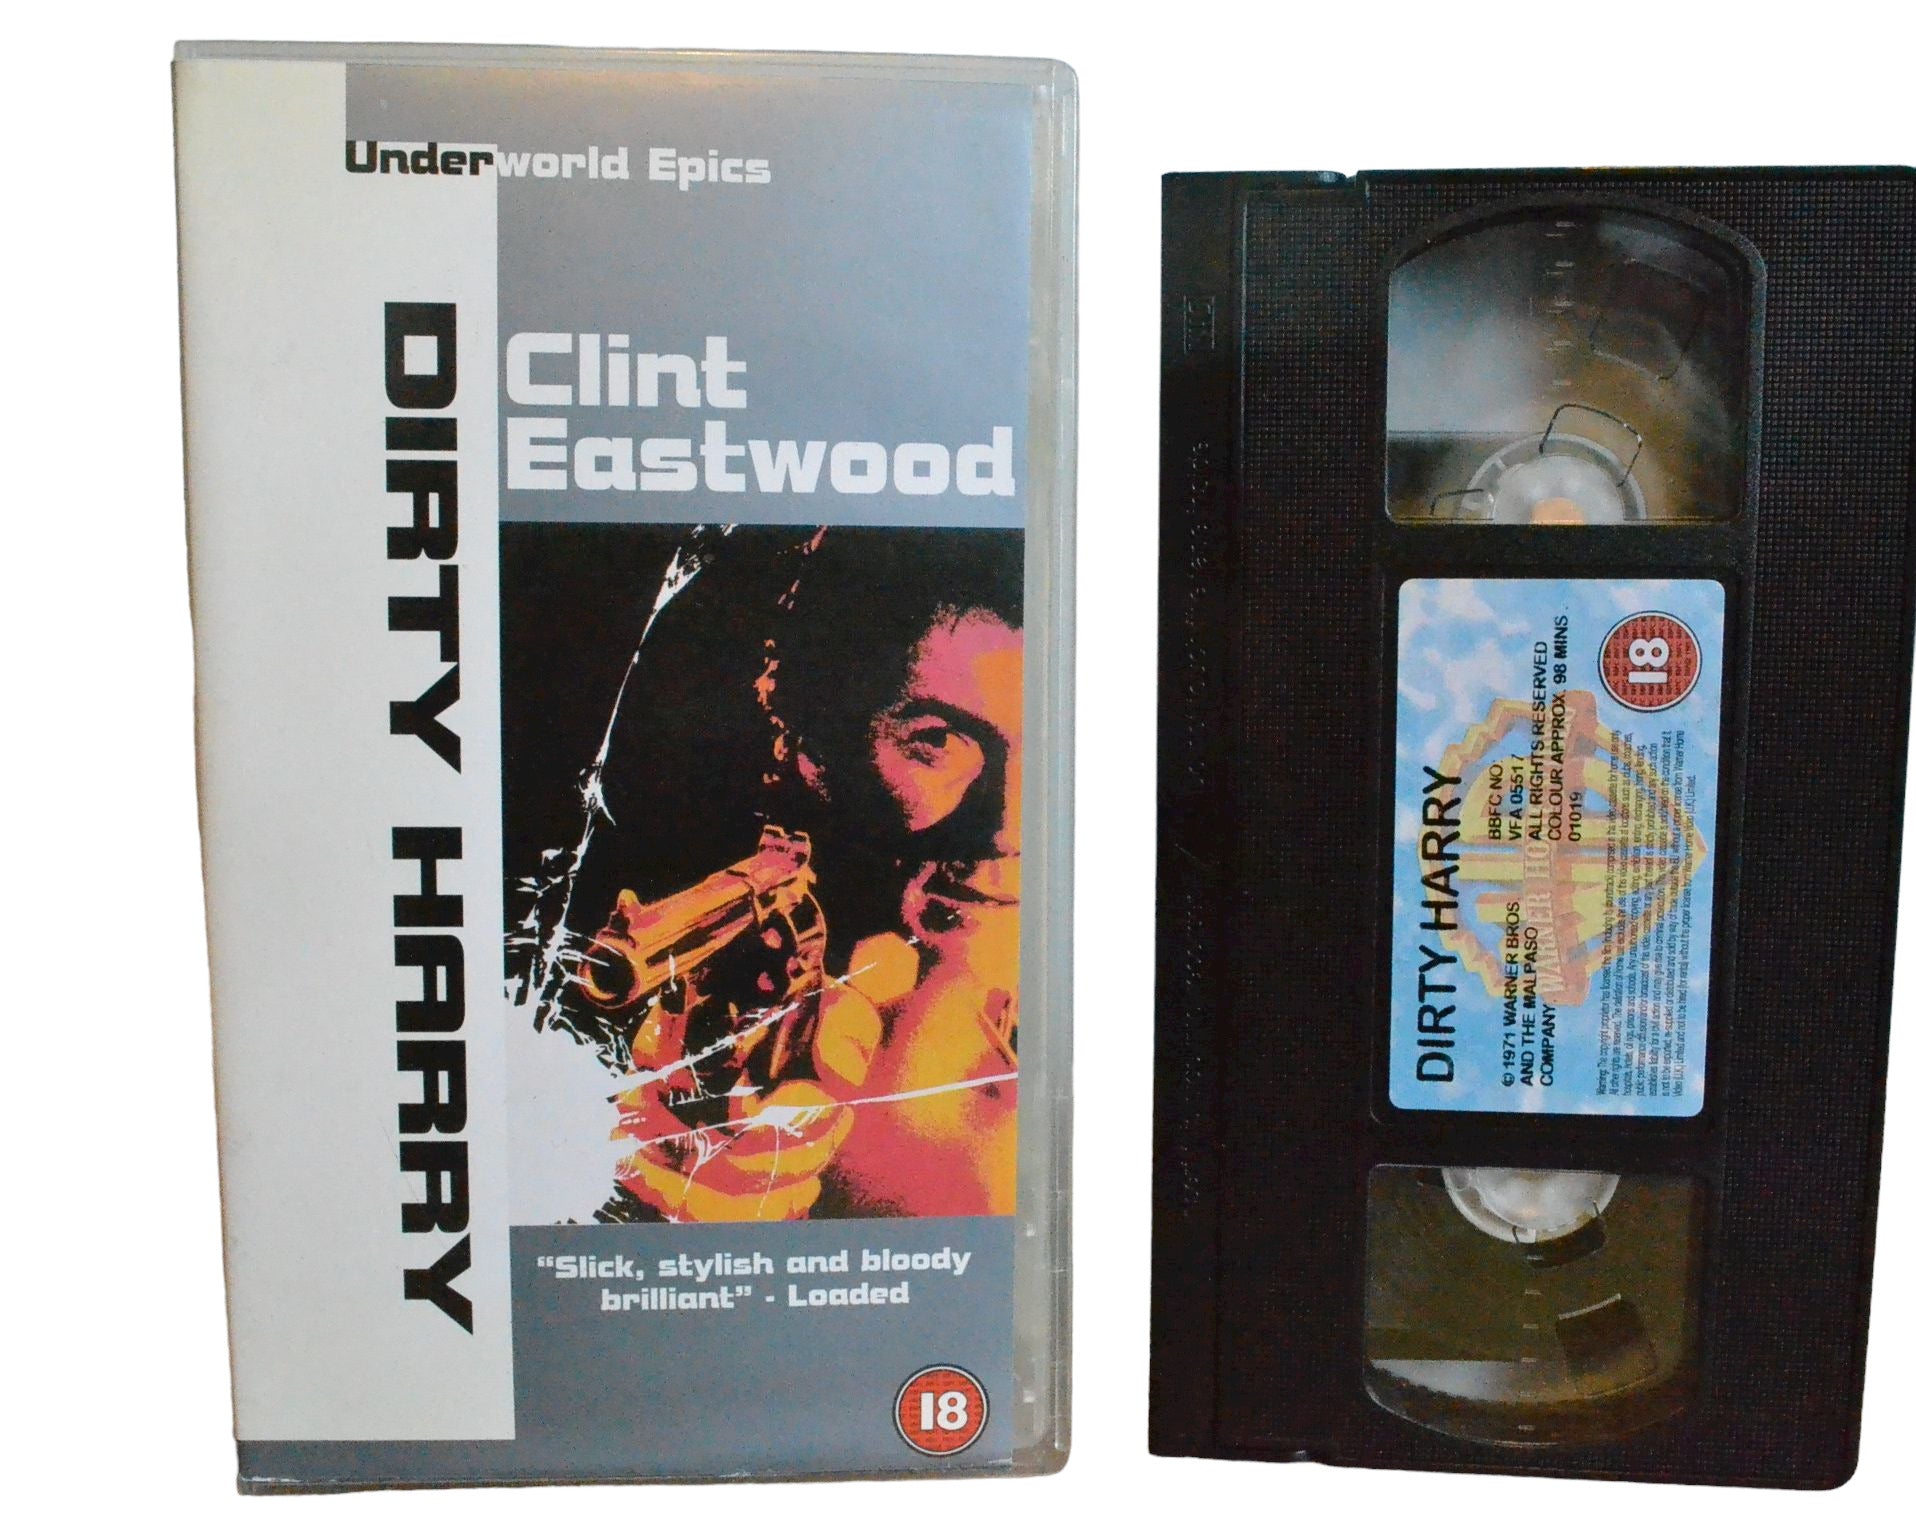 Dirty Harry (Underword Epics) - Clint Eastwood - Warner Home Video - Action - Pal - VHS-